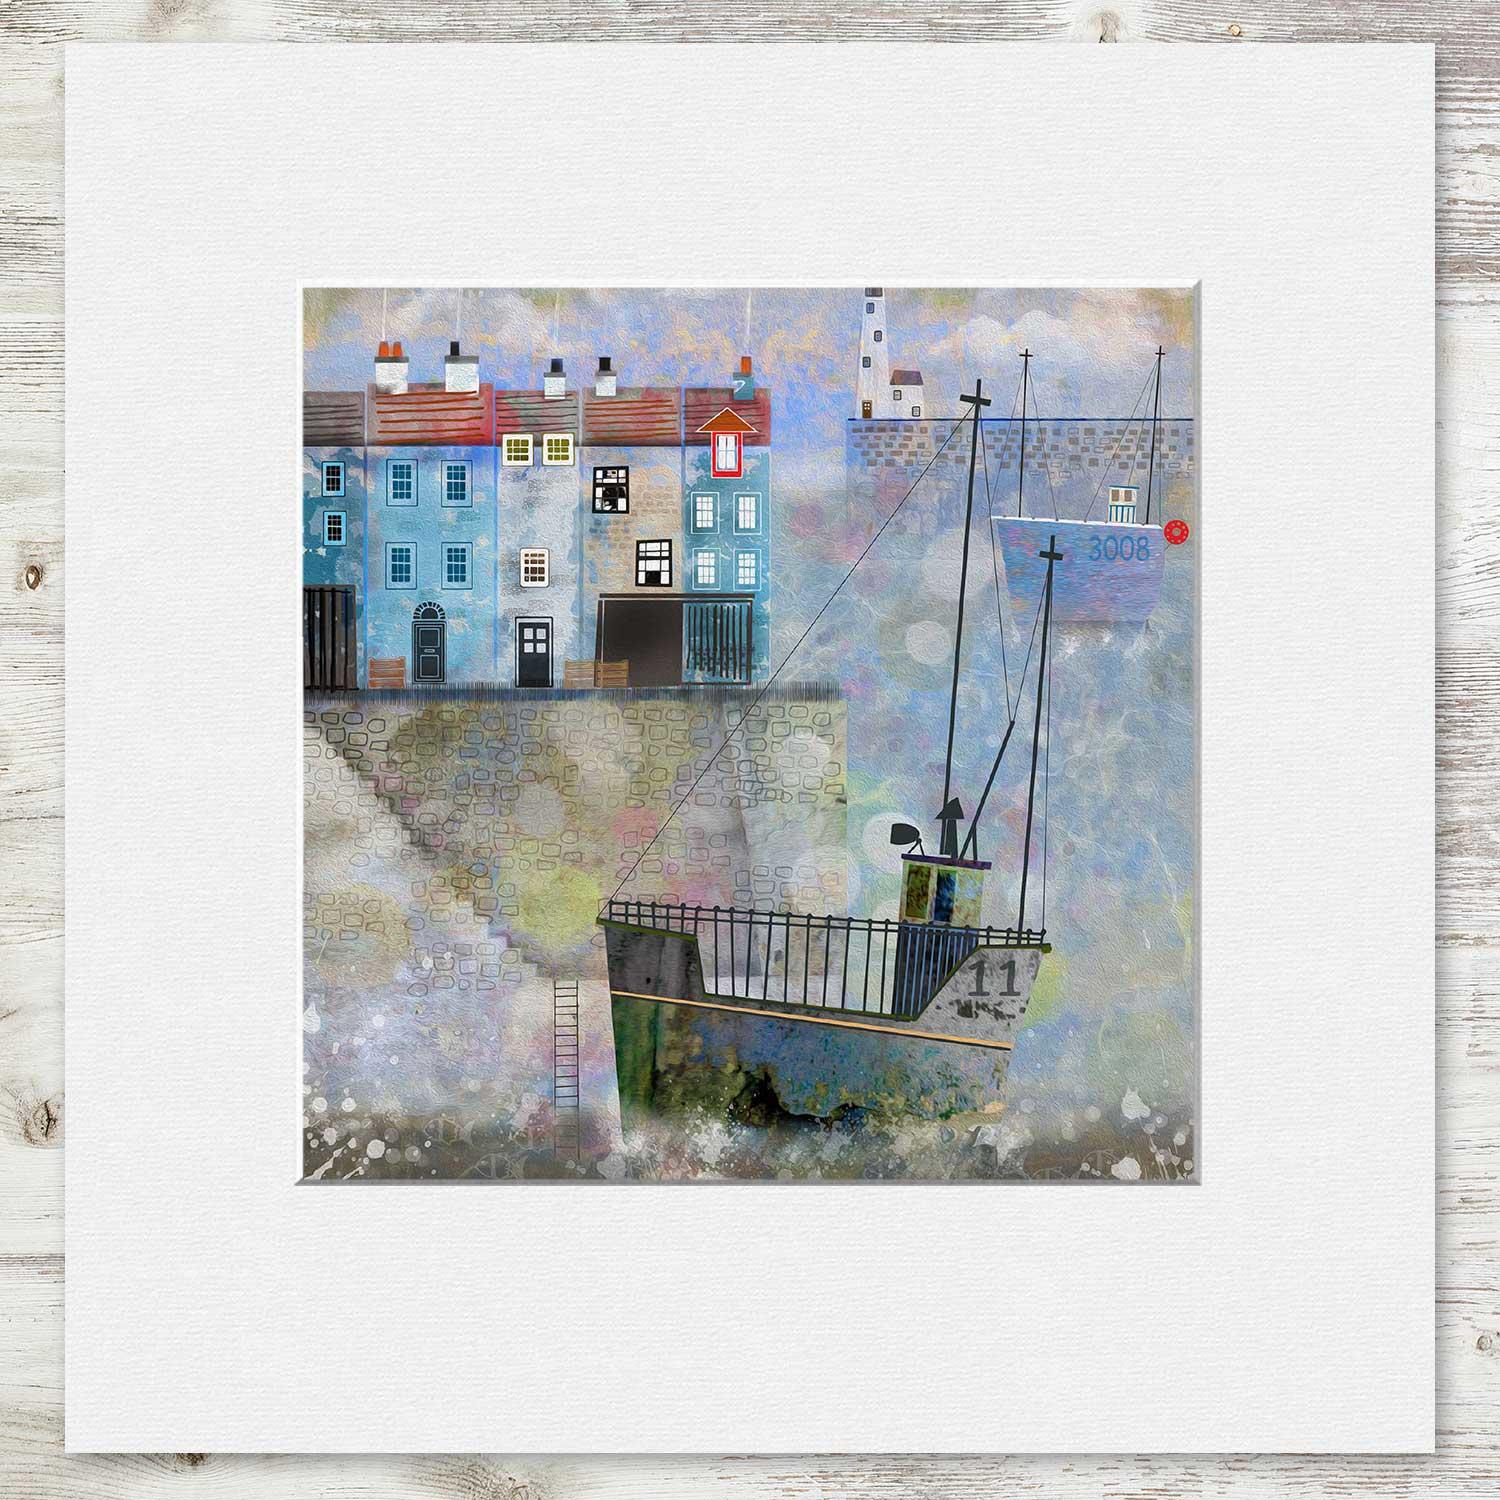 Approaching Harbour Mounted Card from an original painting by artist Rikki O'Neill